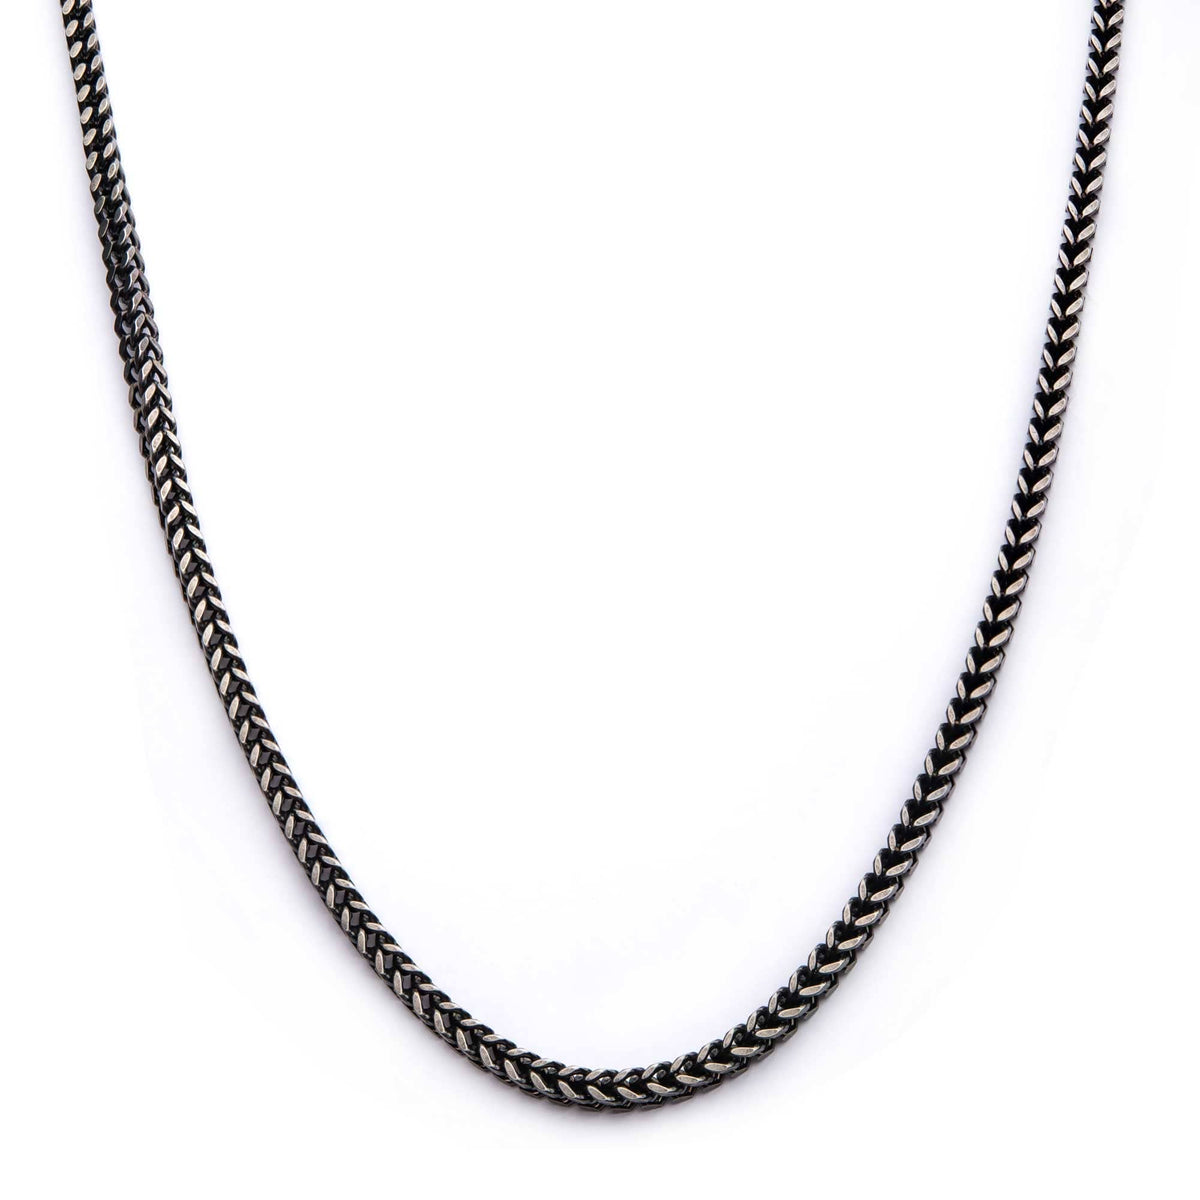 INOX JEWELRY Chains Antiqued Silver Tone Stainless Steel Oxidized Finish 4mm Franco Chain